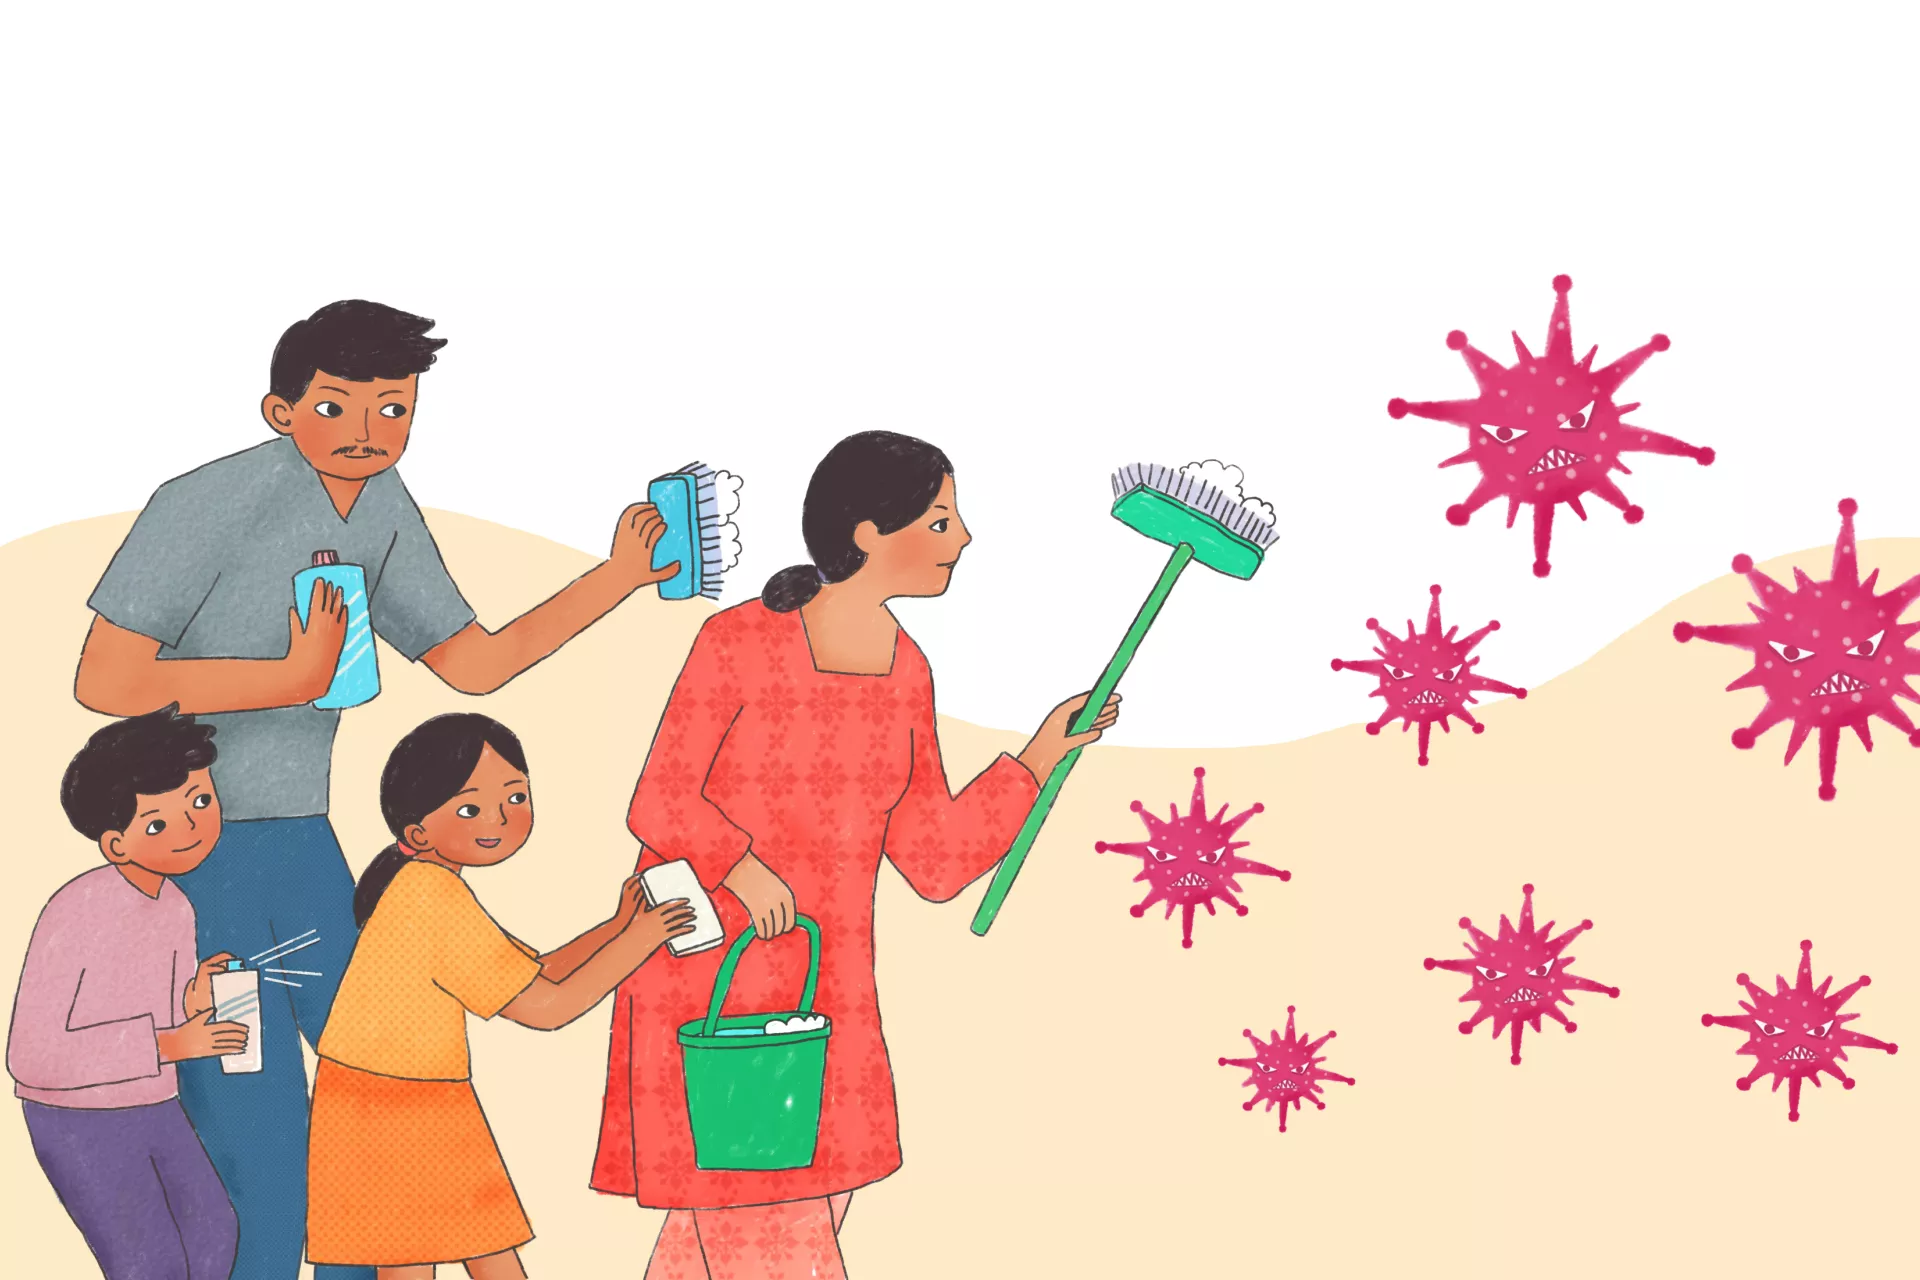 This image shows an illustration of a family with cleaning equipment fighting off the coronavirus